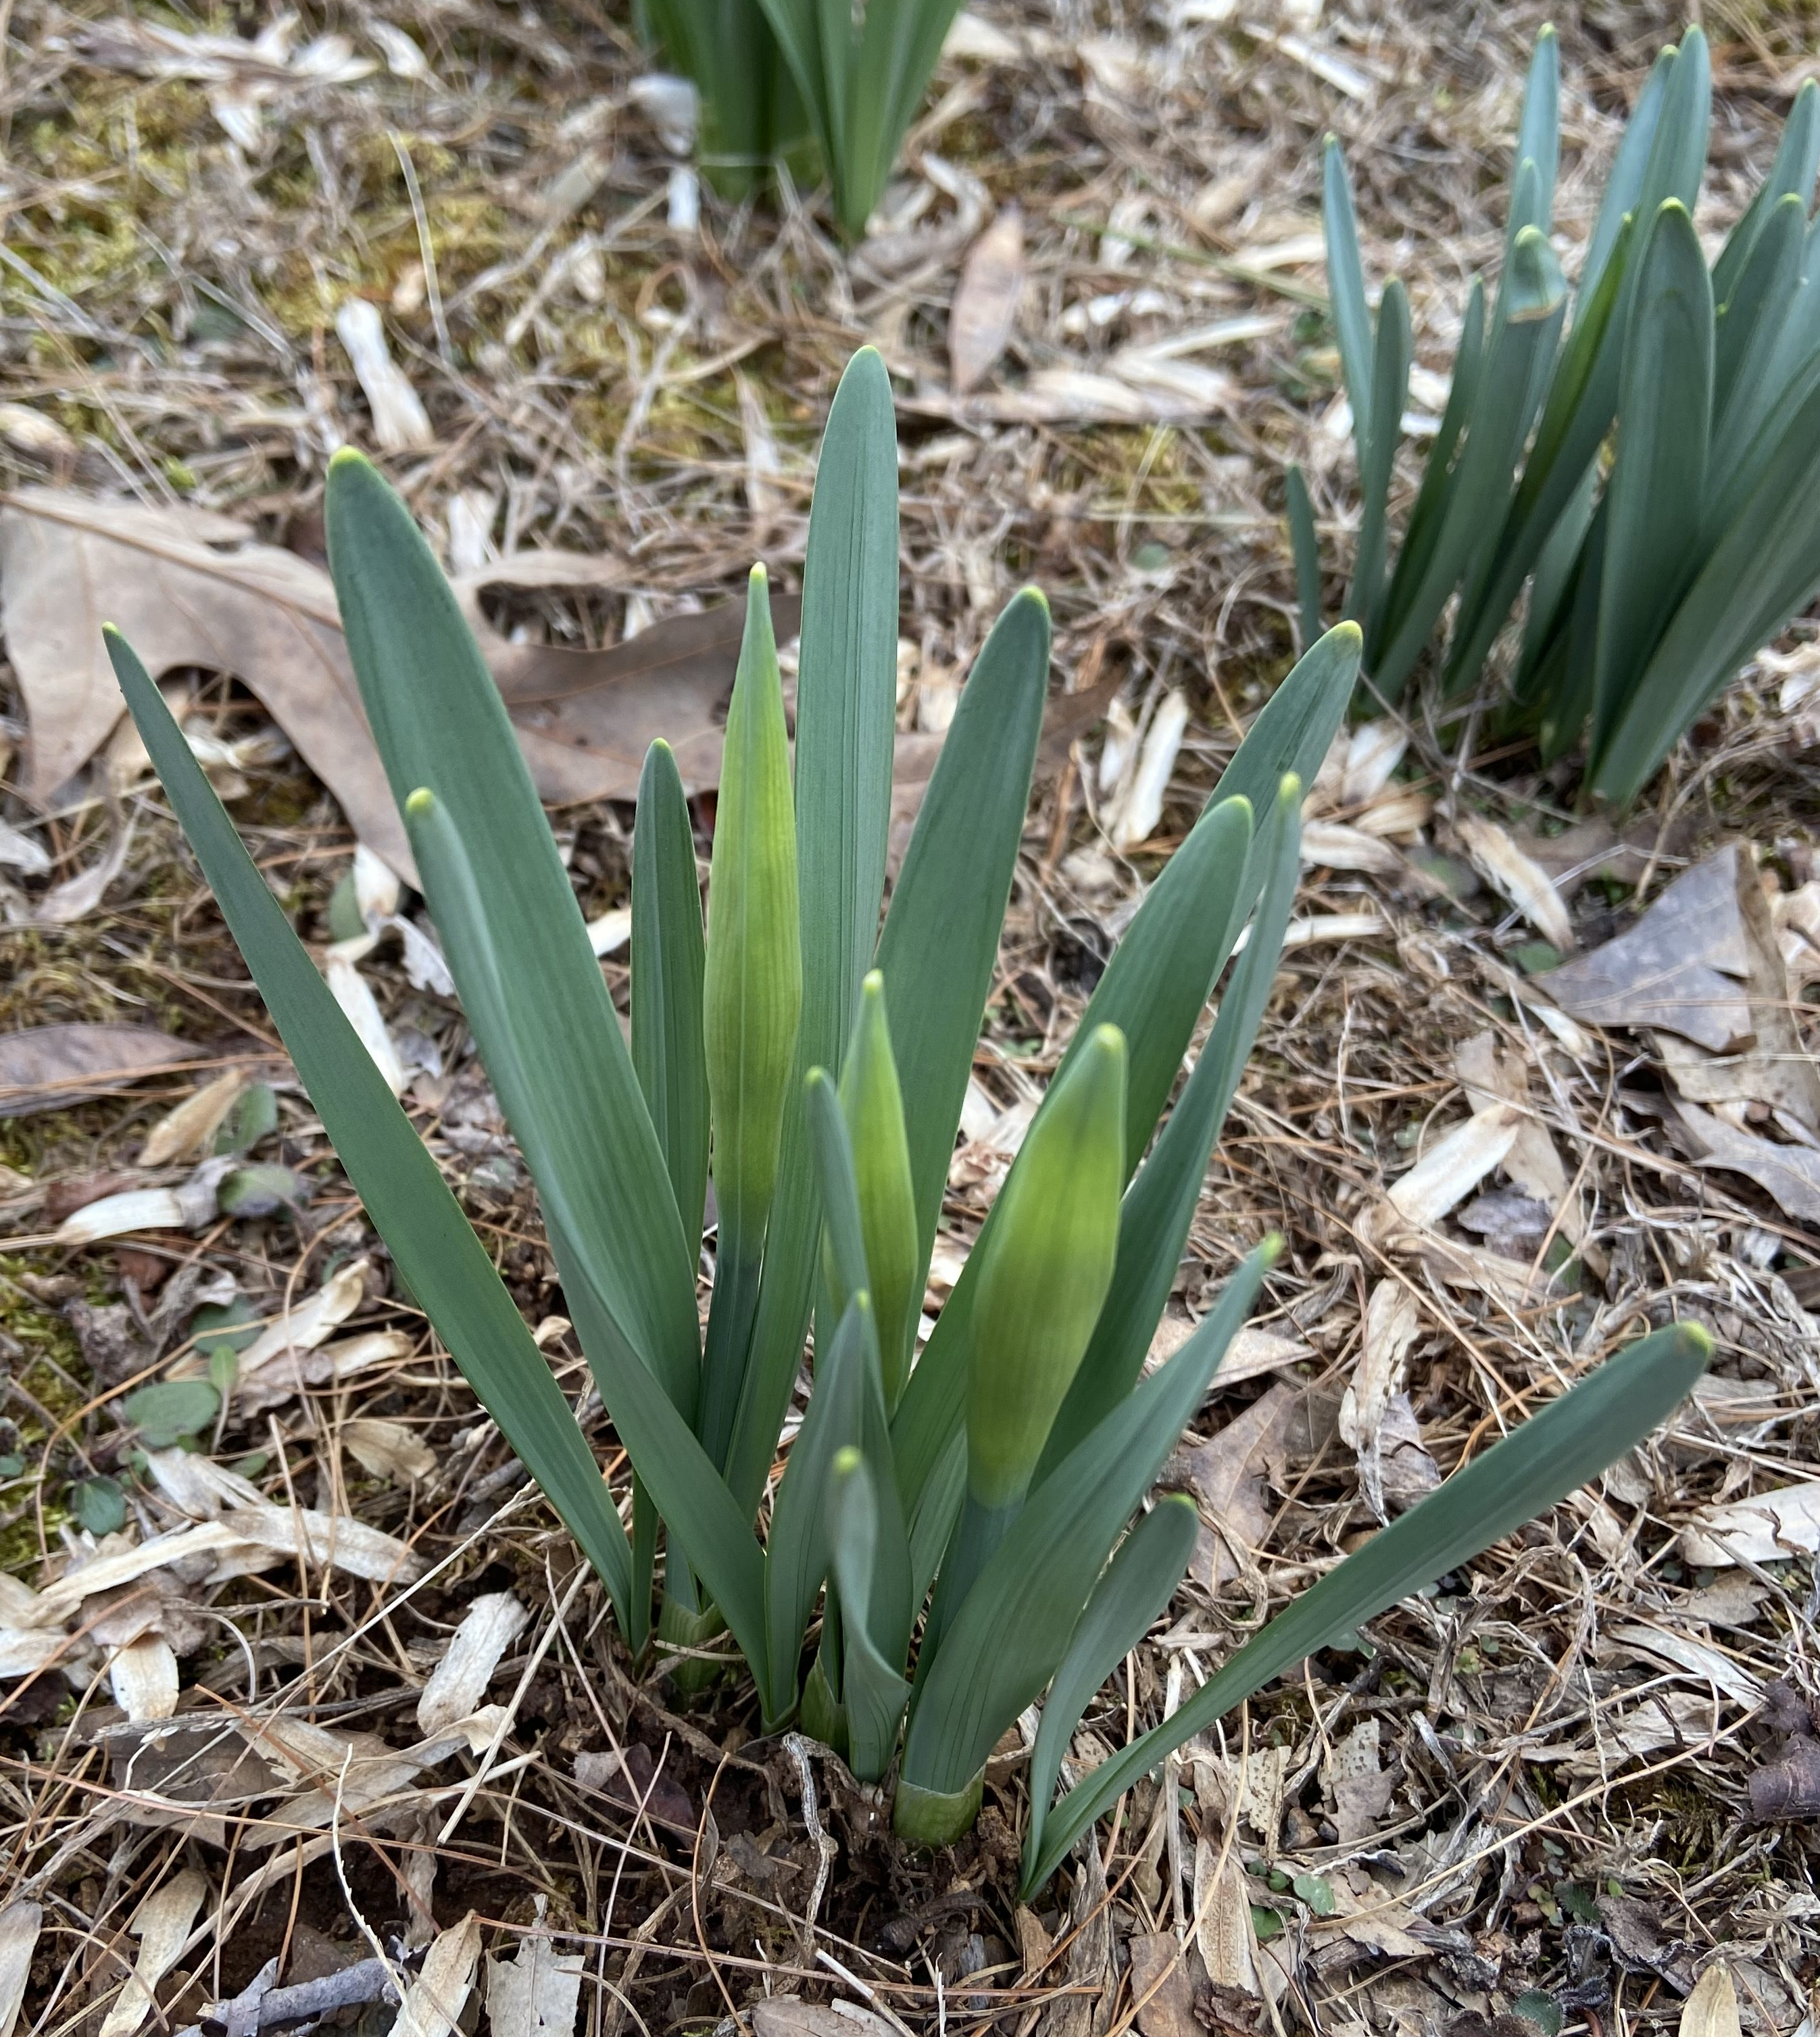 Daffodils with large buds but no blooms